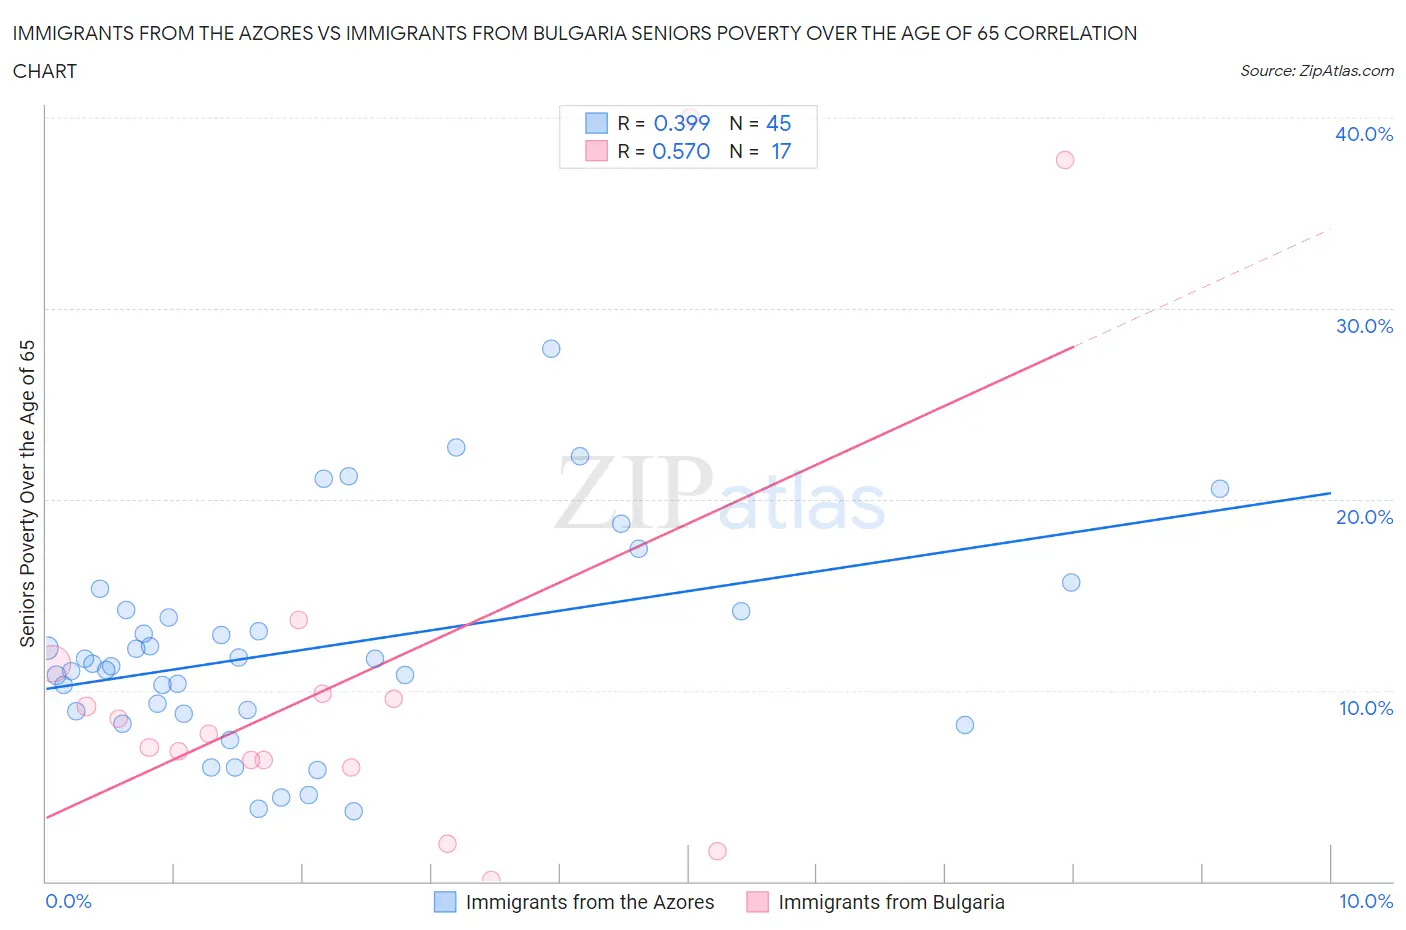 Immigrants from the Azores vs Immigrants from Bulgaria Seniors Poverty Over the Age of 65